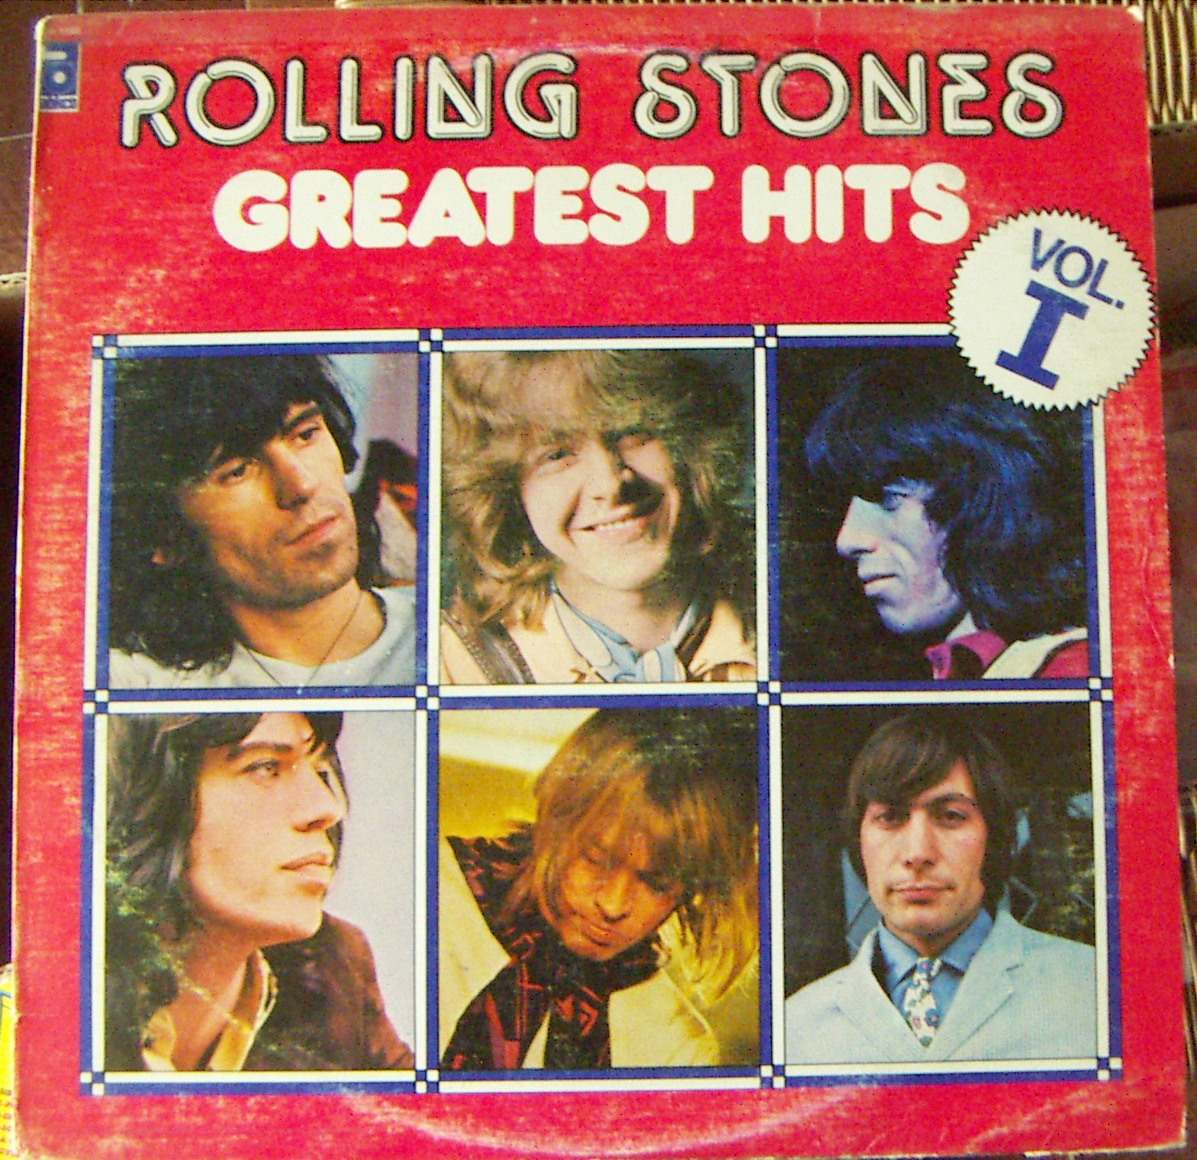 100 Greatest Rolling Stones Songs Rolling Stone